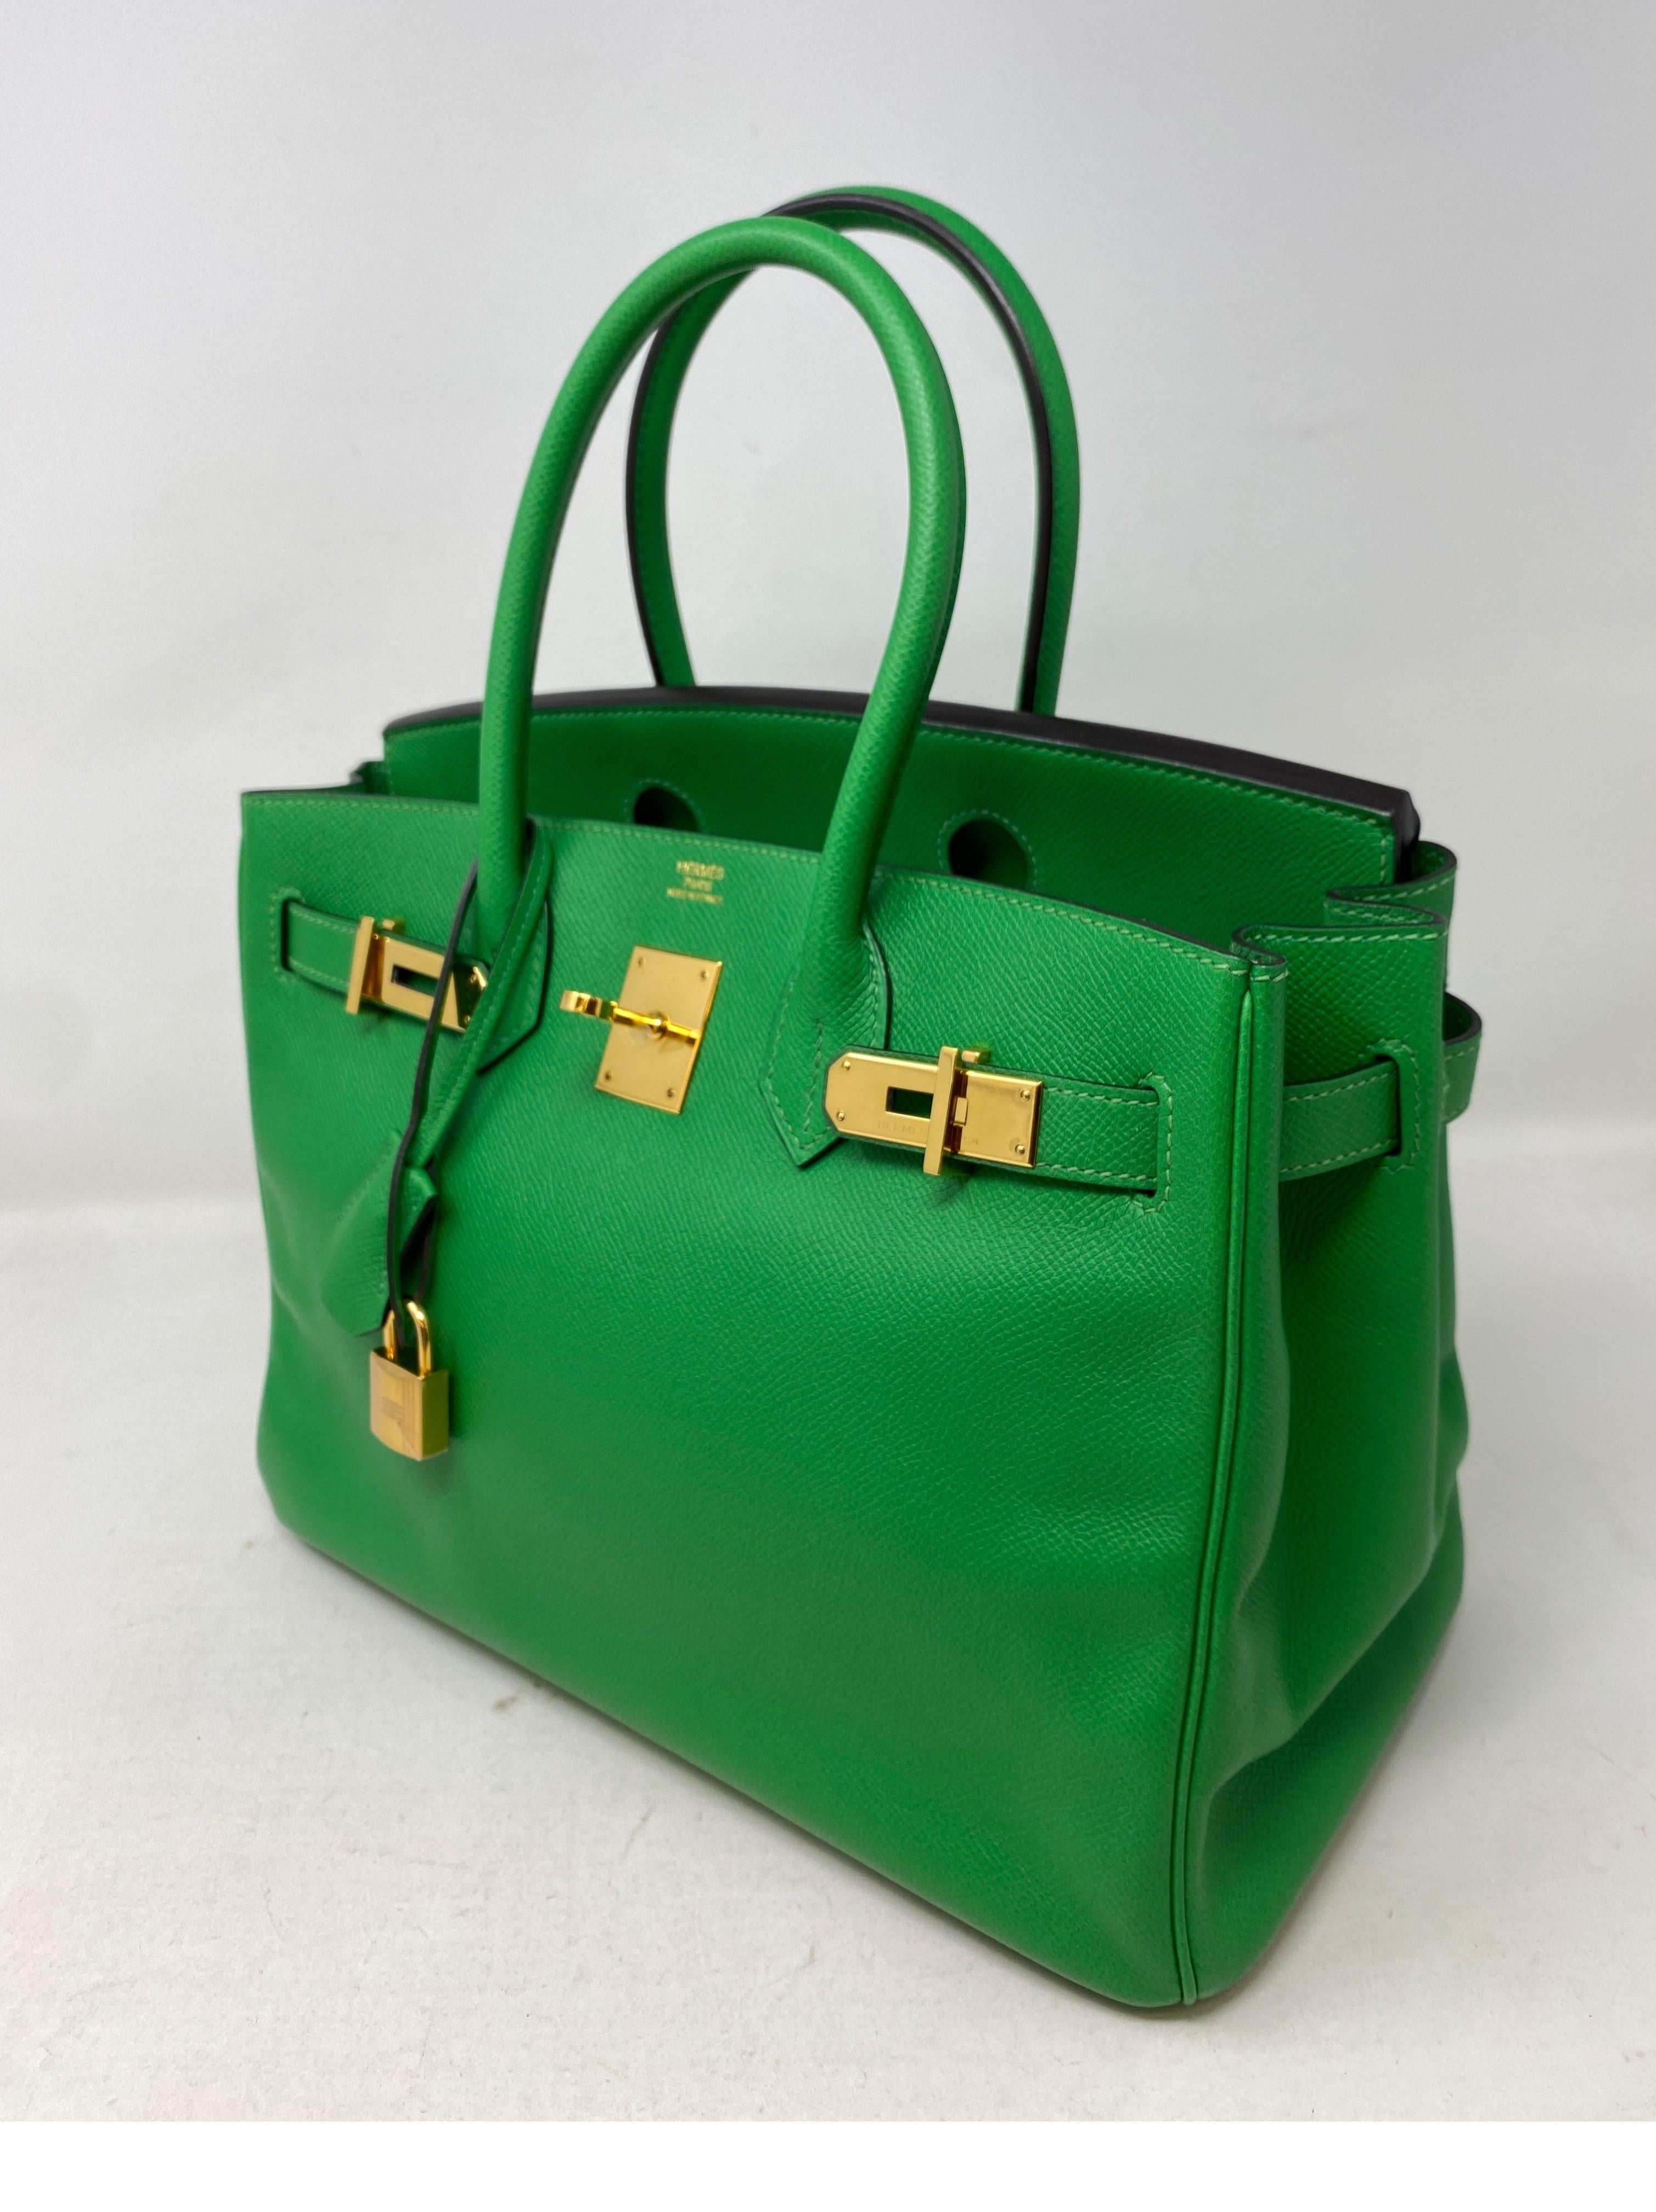 Hermes Birkin 30 Bamboo Green Bag. Rare green color with gold hardware. Collector's piece. Good condition. Includes clochette, lock, keys, and dust cover. Guaranteed authentic. 